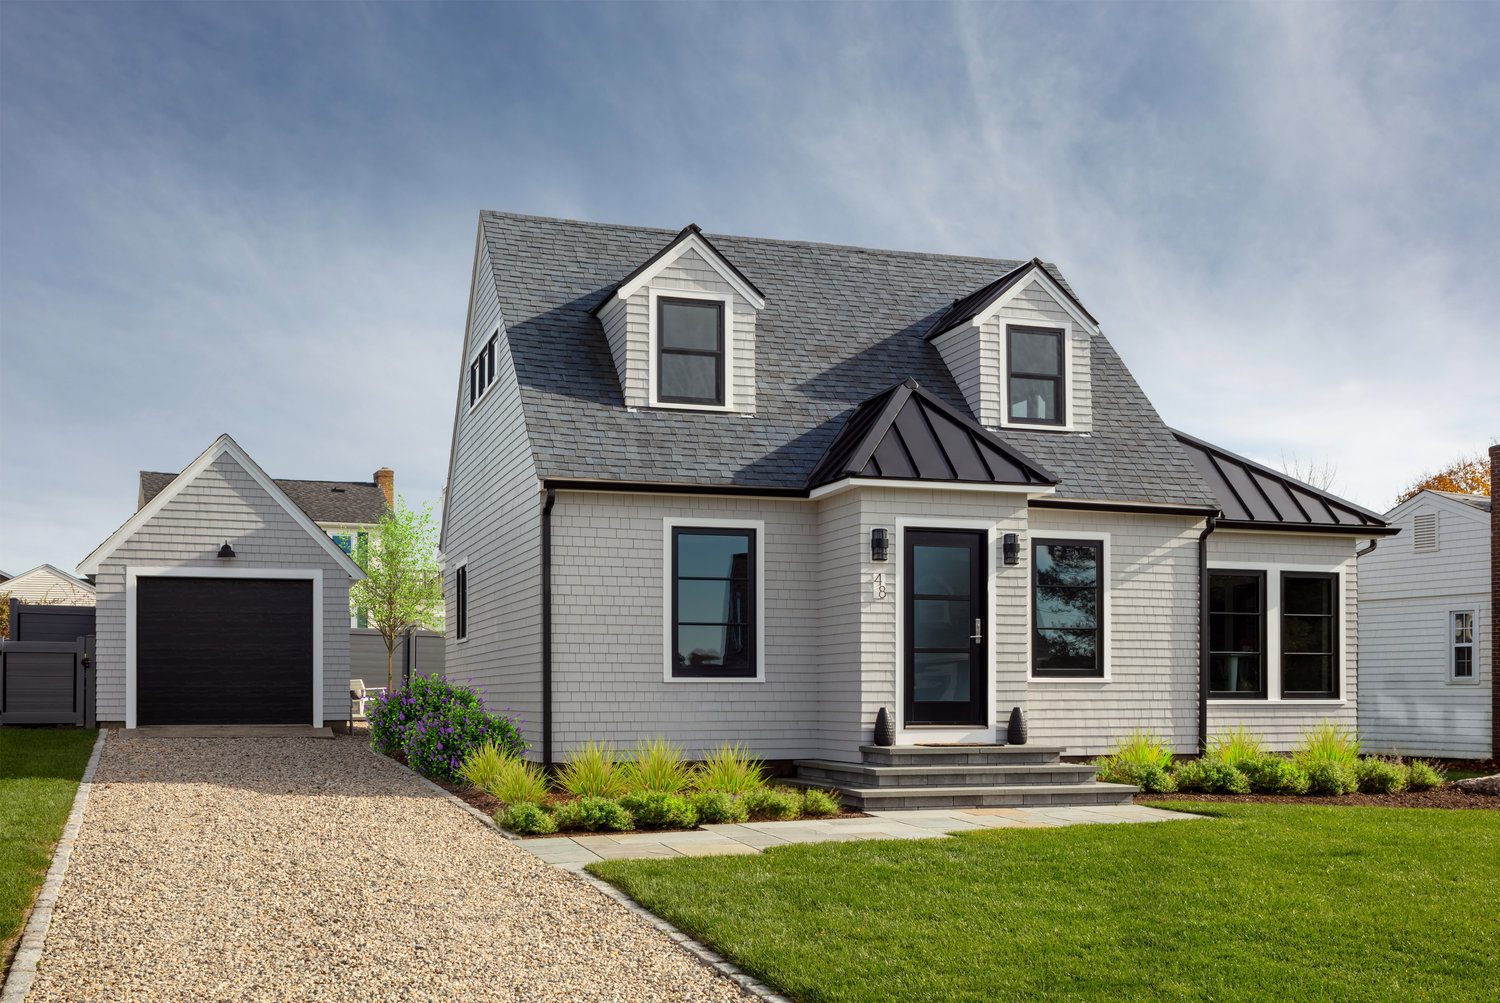 Both inside and out, a prescribed use of black elements frame neutral colors adding interest and sophistication to the humble  Cape Cod style home.